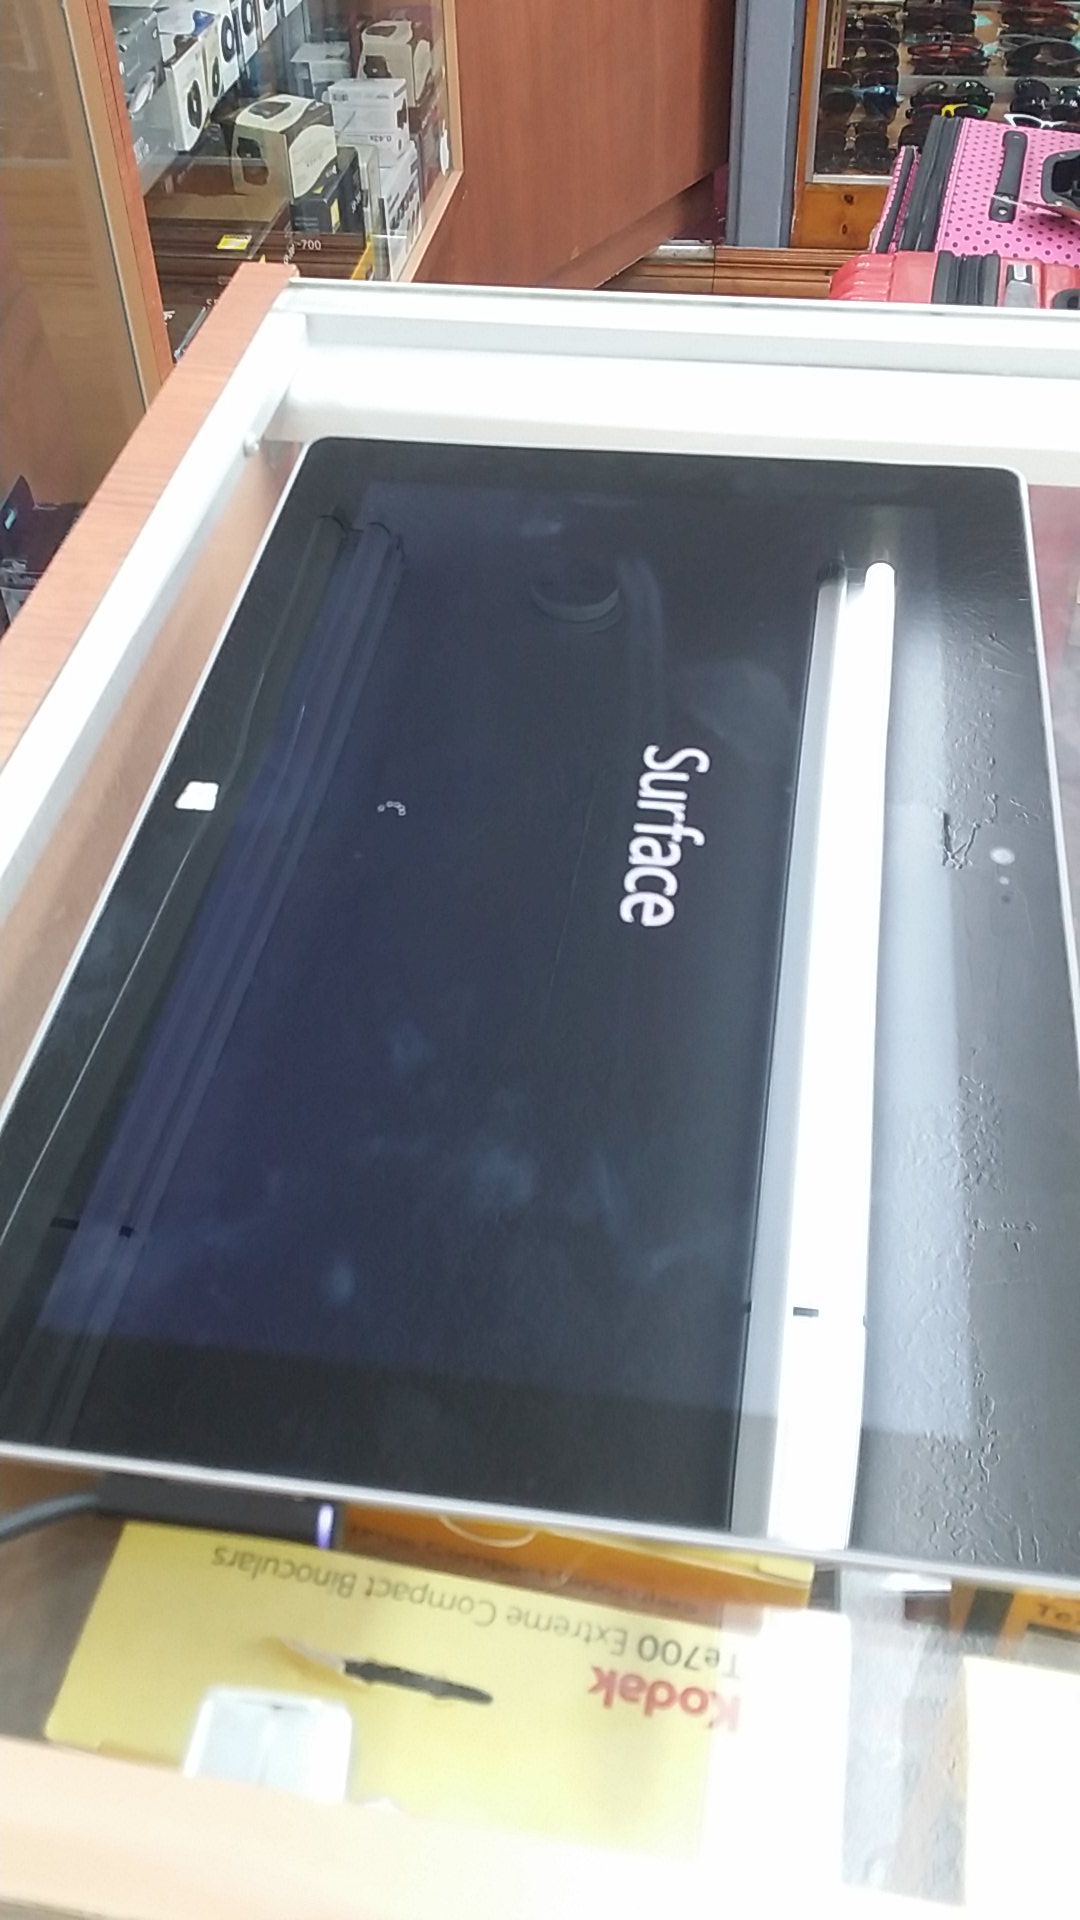 MICROSOFT SURFACE 2 64 GB WI FI ONLY FOR SALE!!!